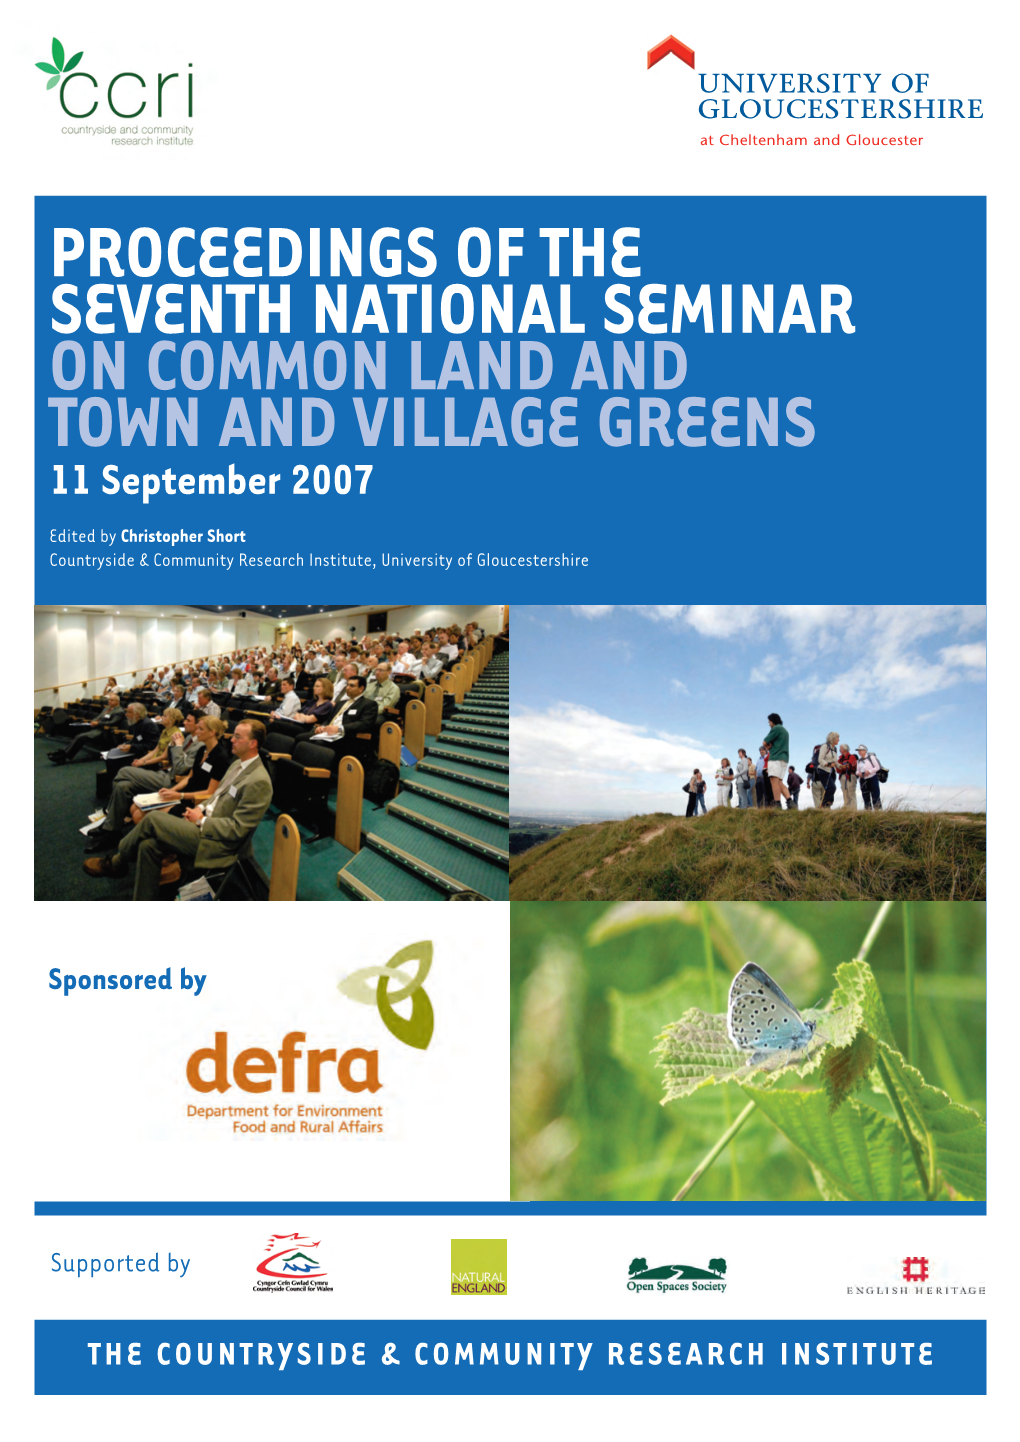 PROCEEDINGS of the Seventh National Seminar on Common Land and Town and Village Greens 11 September 2007